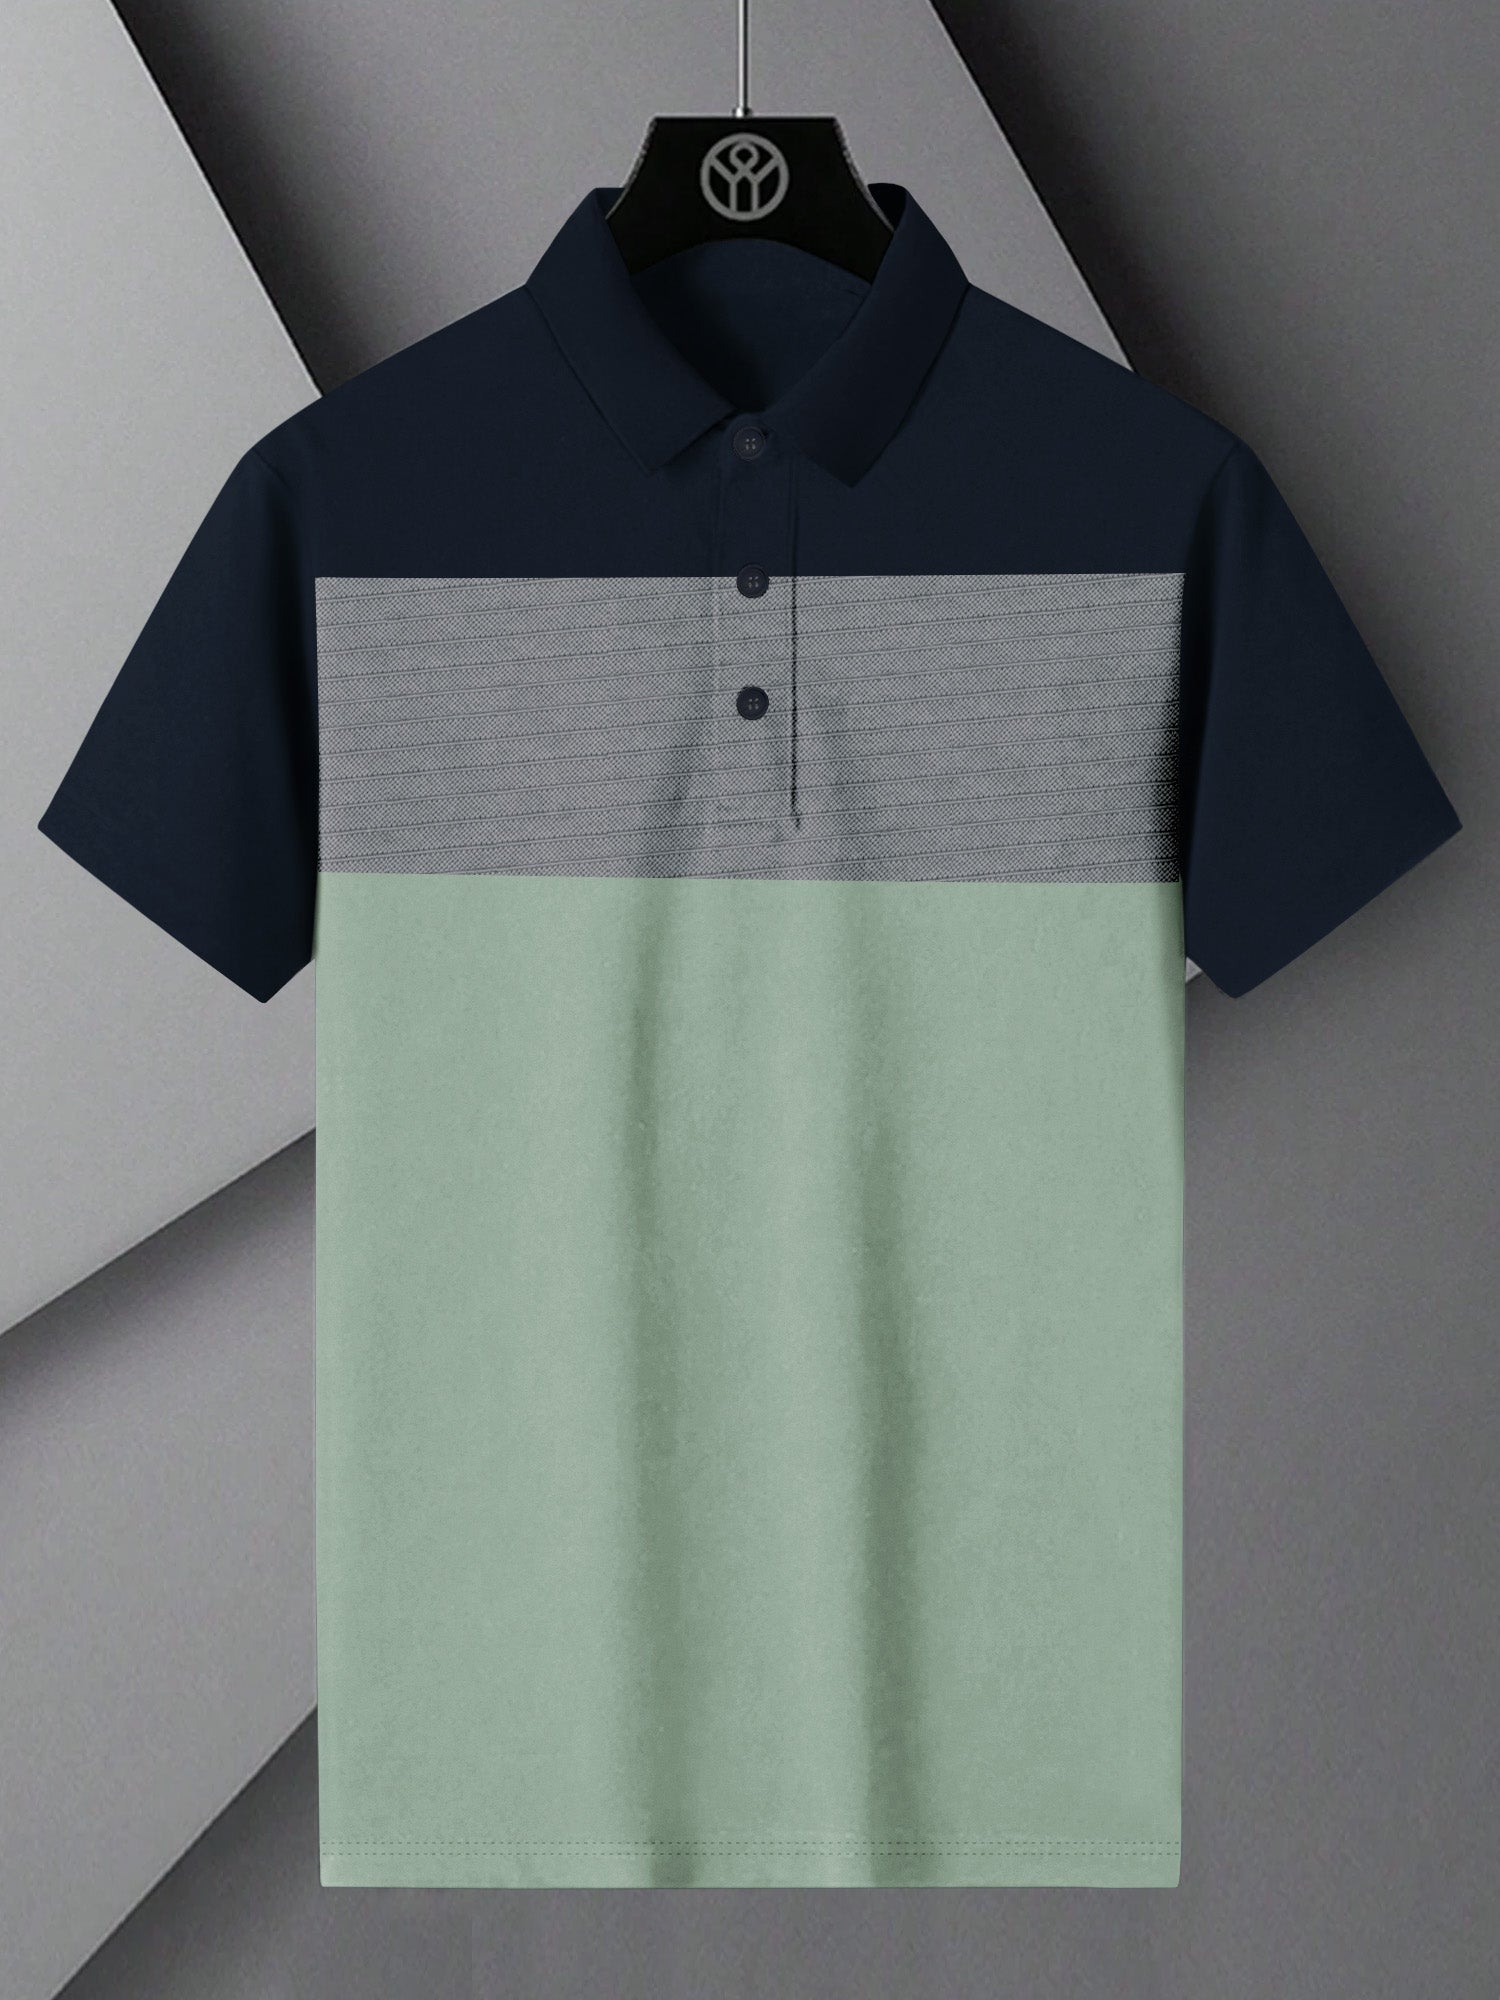 NXT Summer Polo Shirt For Men-Light Green with Navy Panel-BE688/BR12941